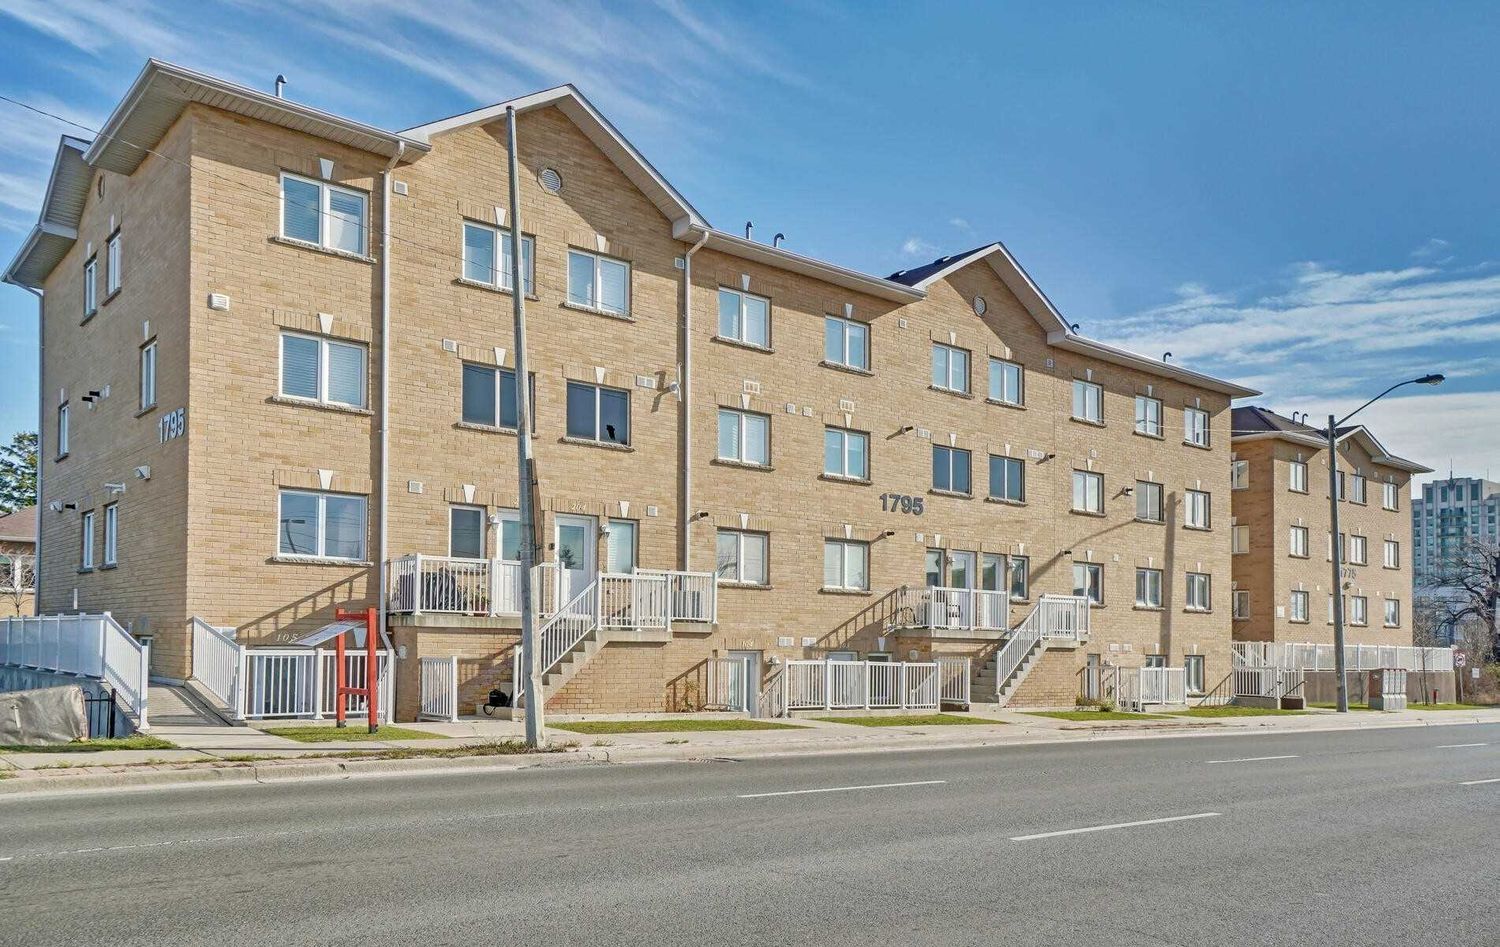 1775-1795 Markham Road. Markham Gates Townhomes is located in  Scarborough, Toronto - image #1 of 2